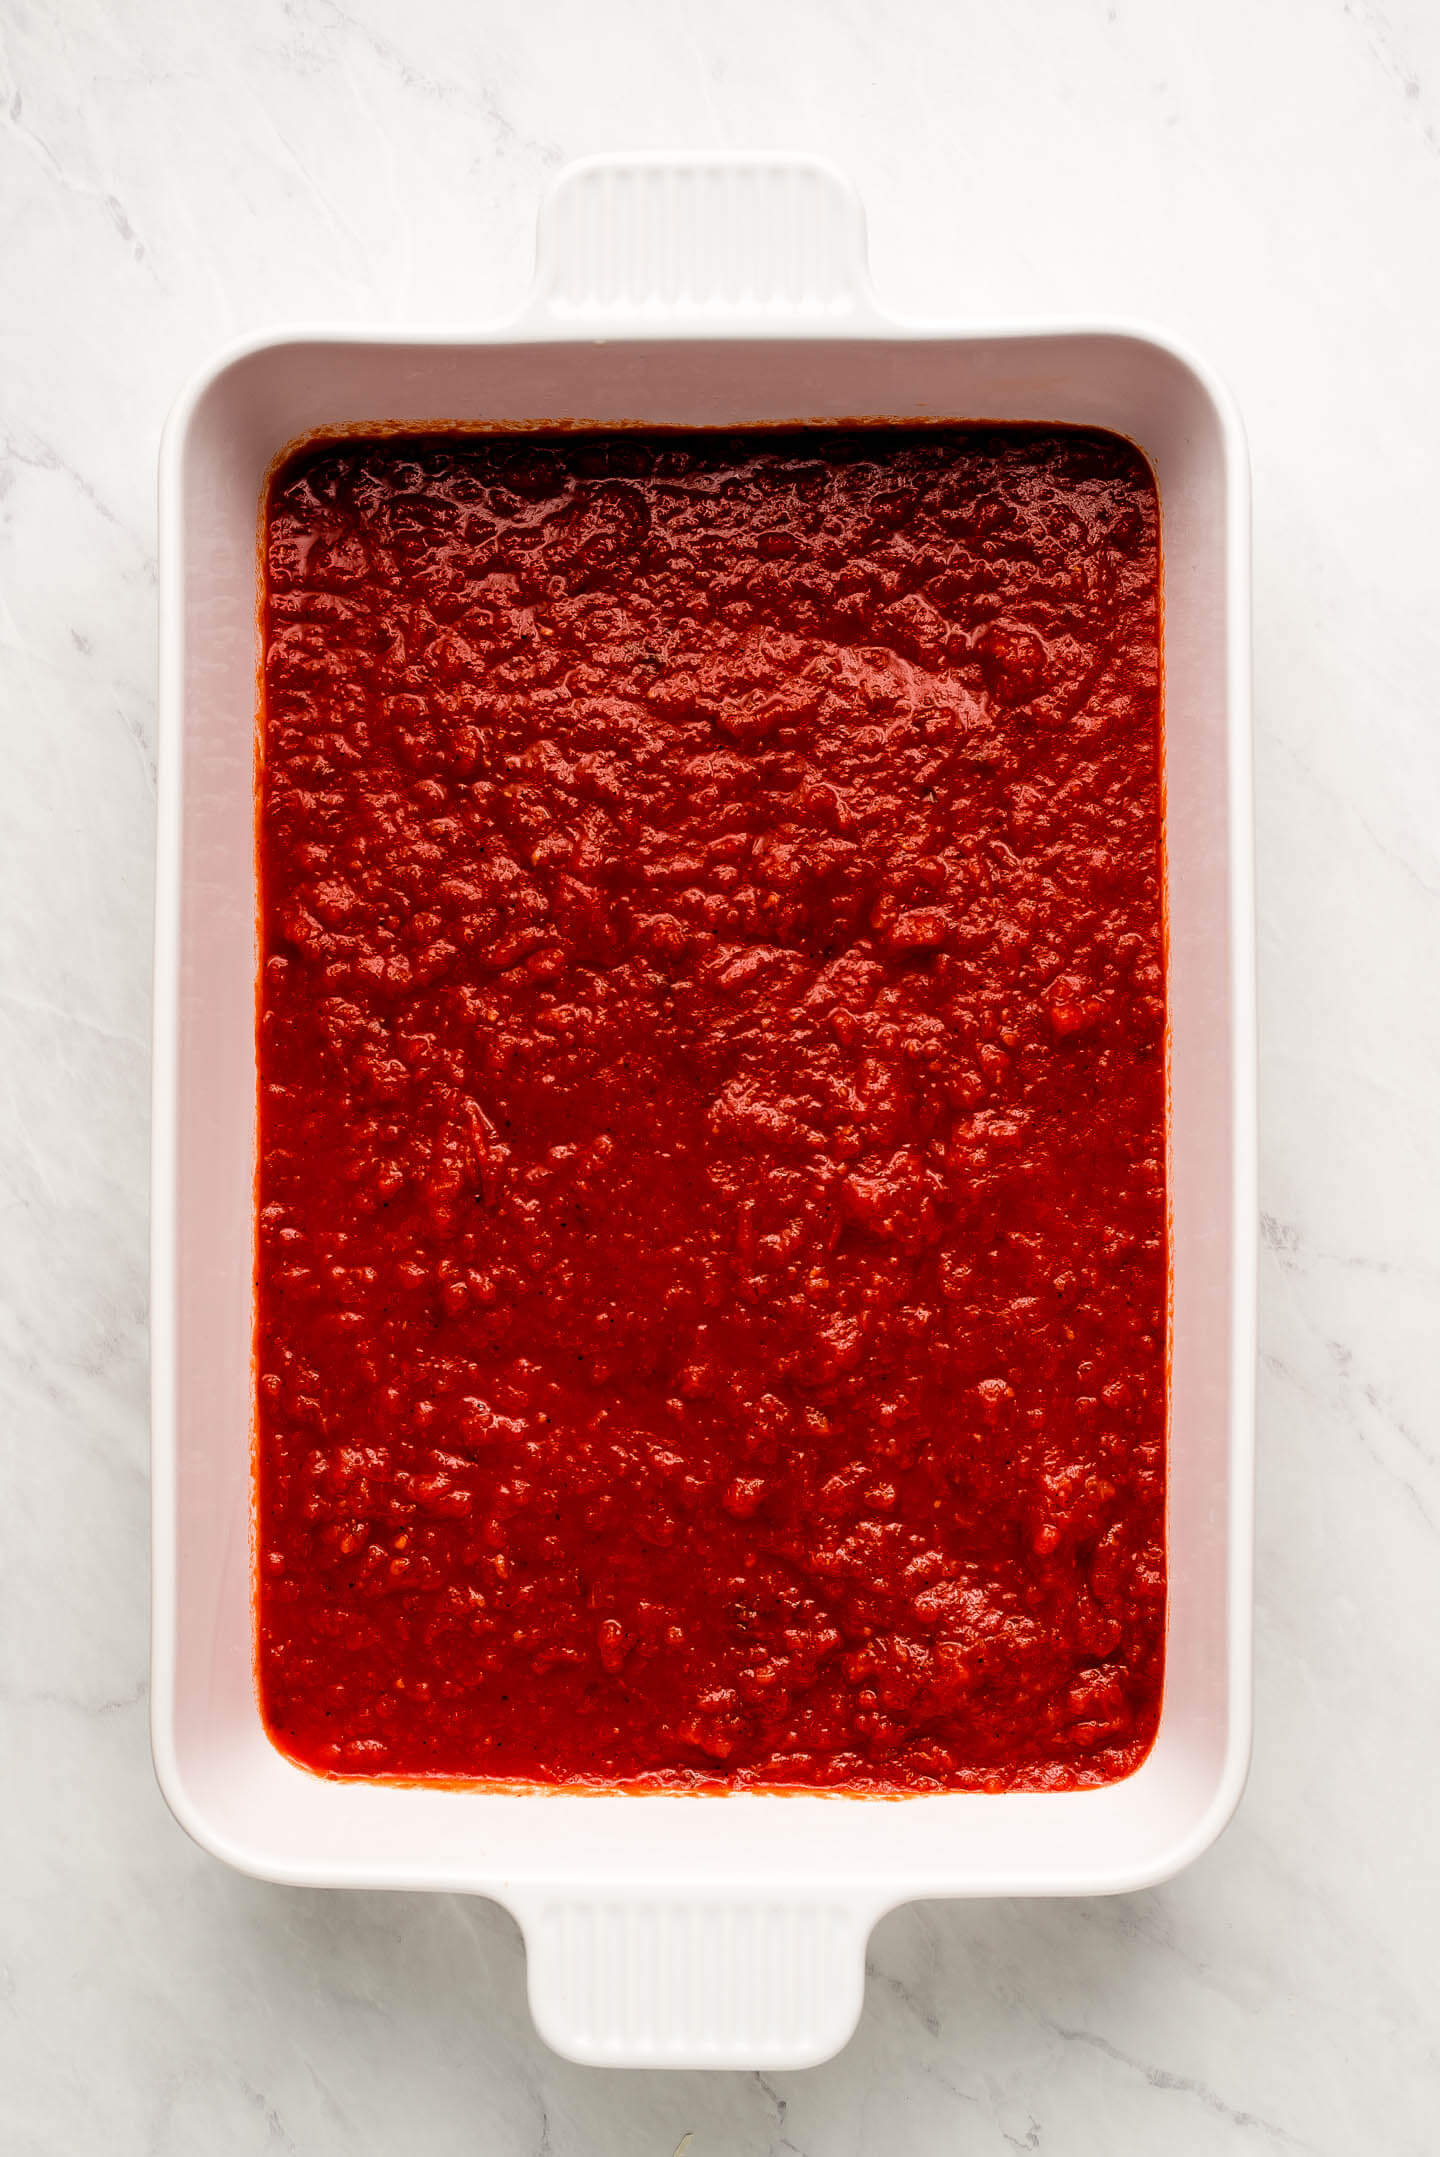 A white casserole dish with red marinara sauce on the bottom.